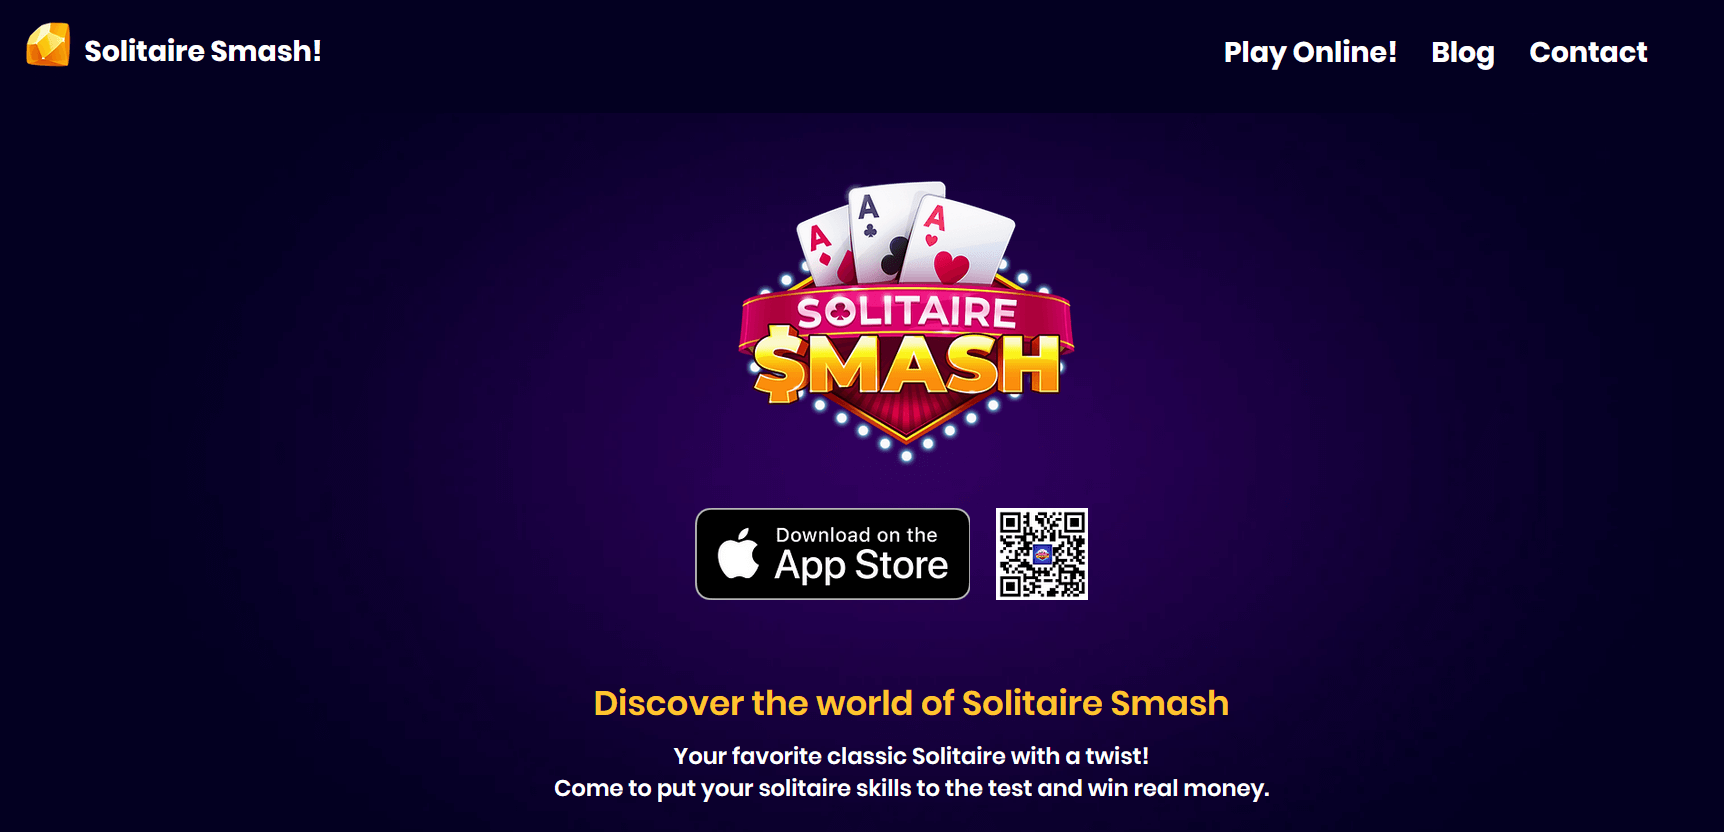 card games for money - Solitaire Smash